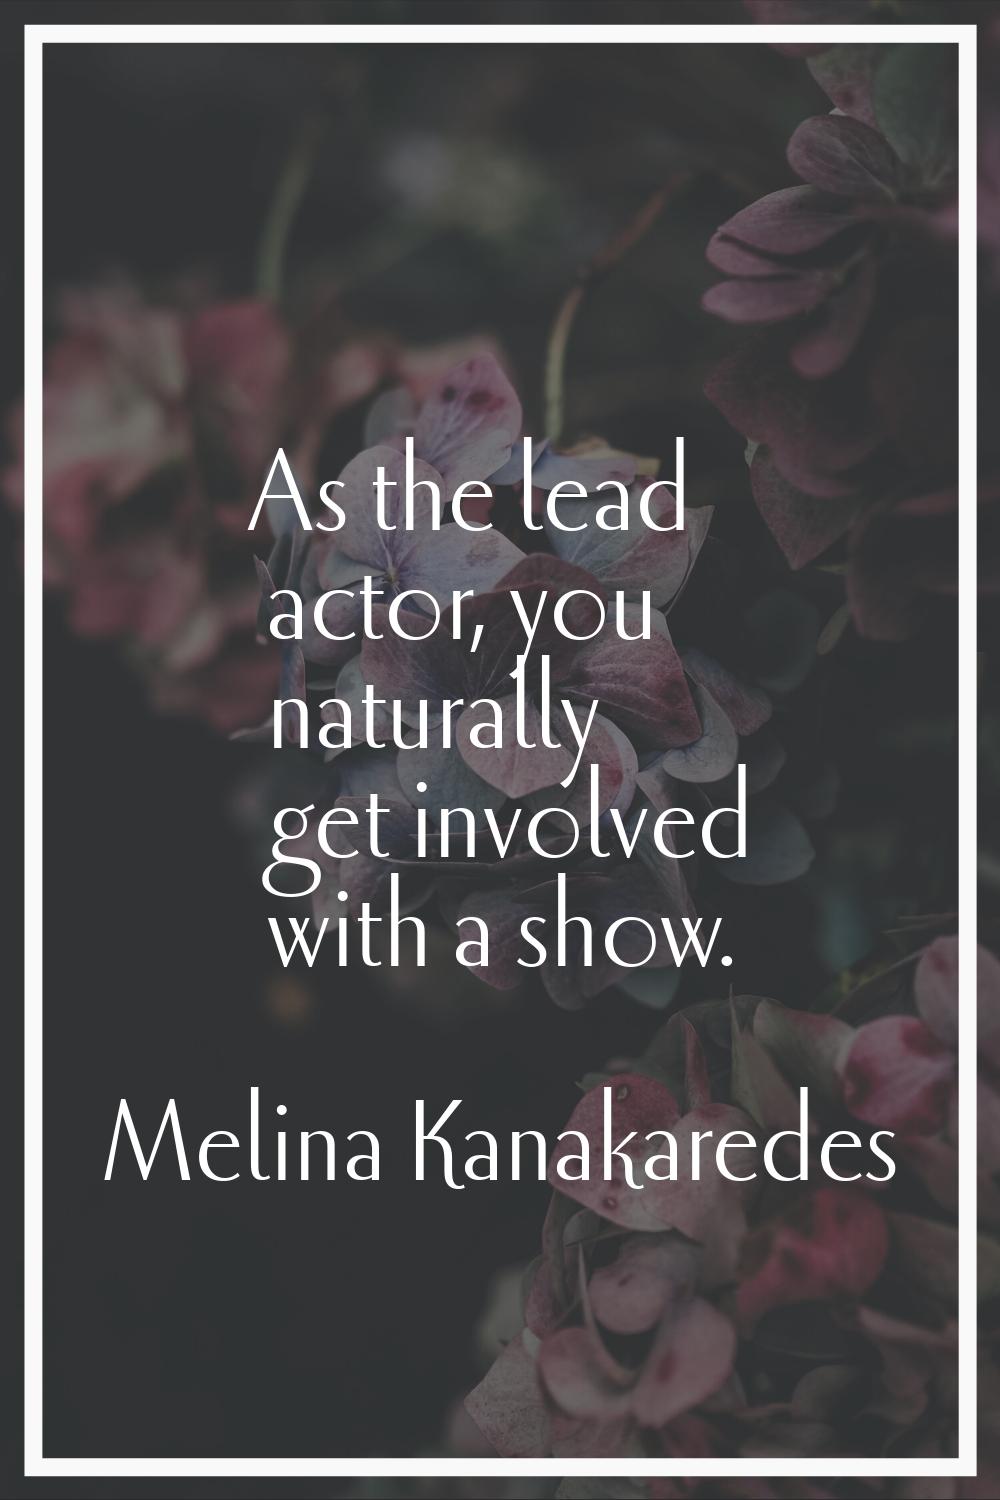 As the lead actor, you naturally get involved with a show.